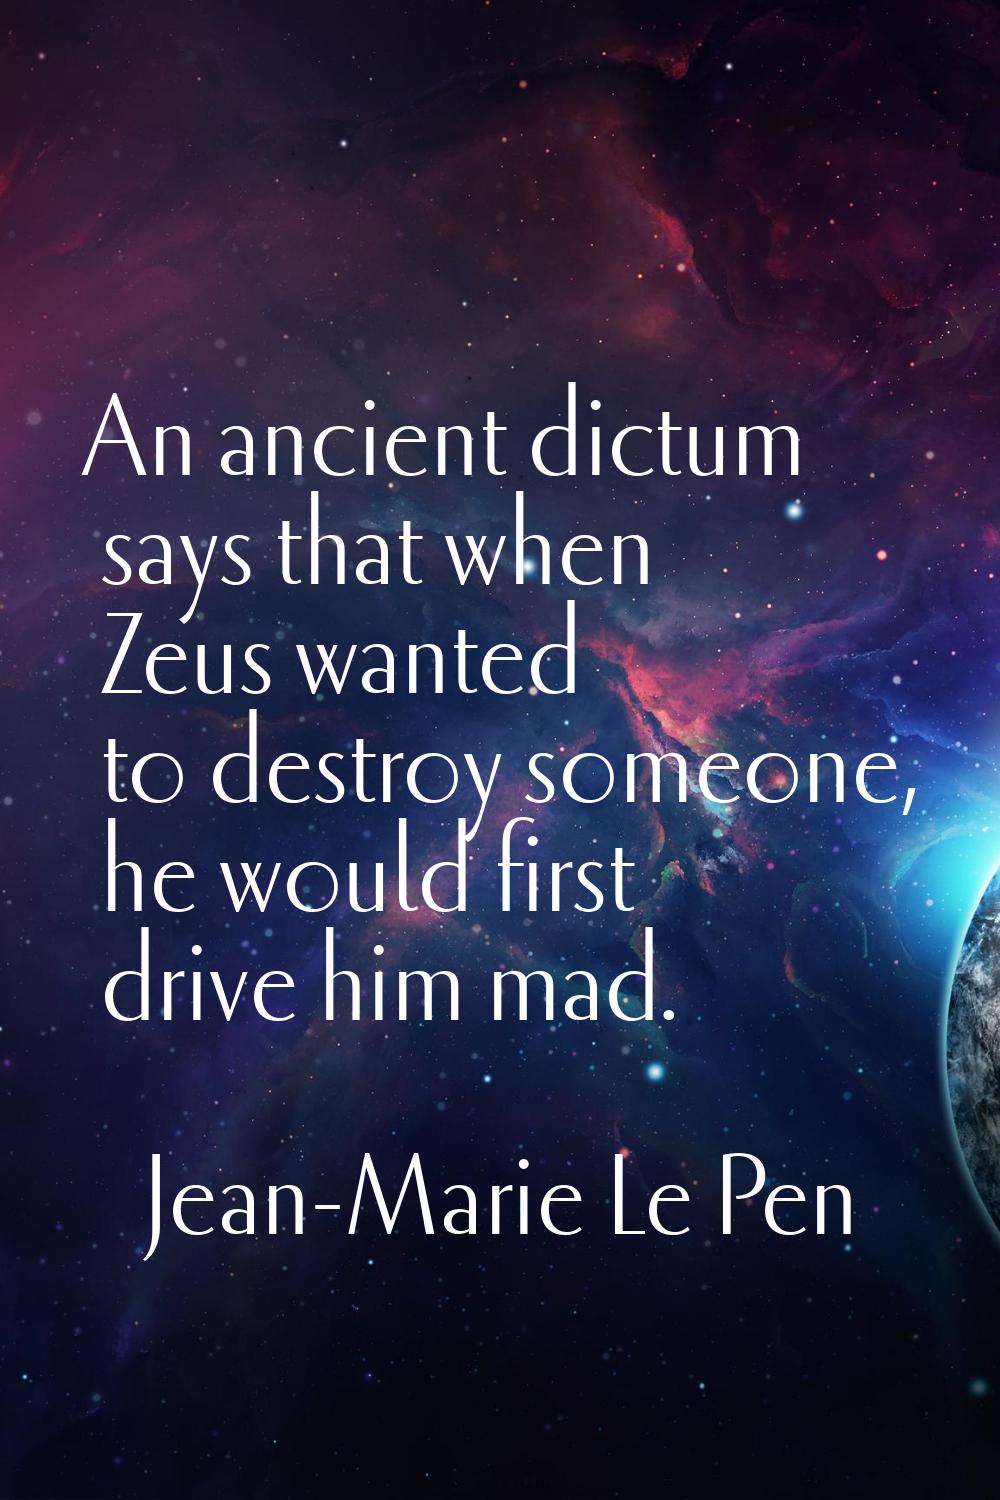 An ancient dictum says that when Zeus wanted to destroy someone, he would first drive him mad.